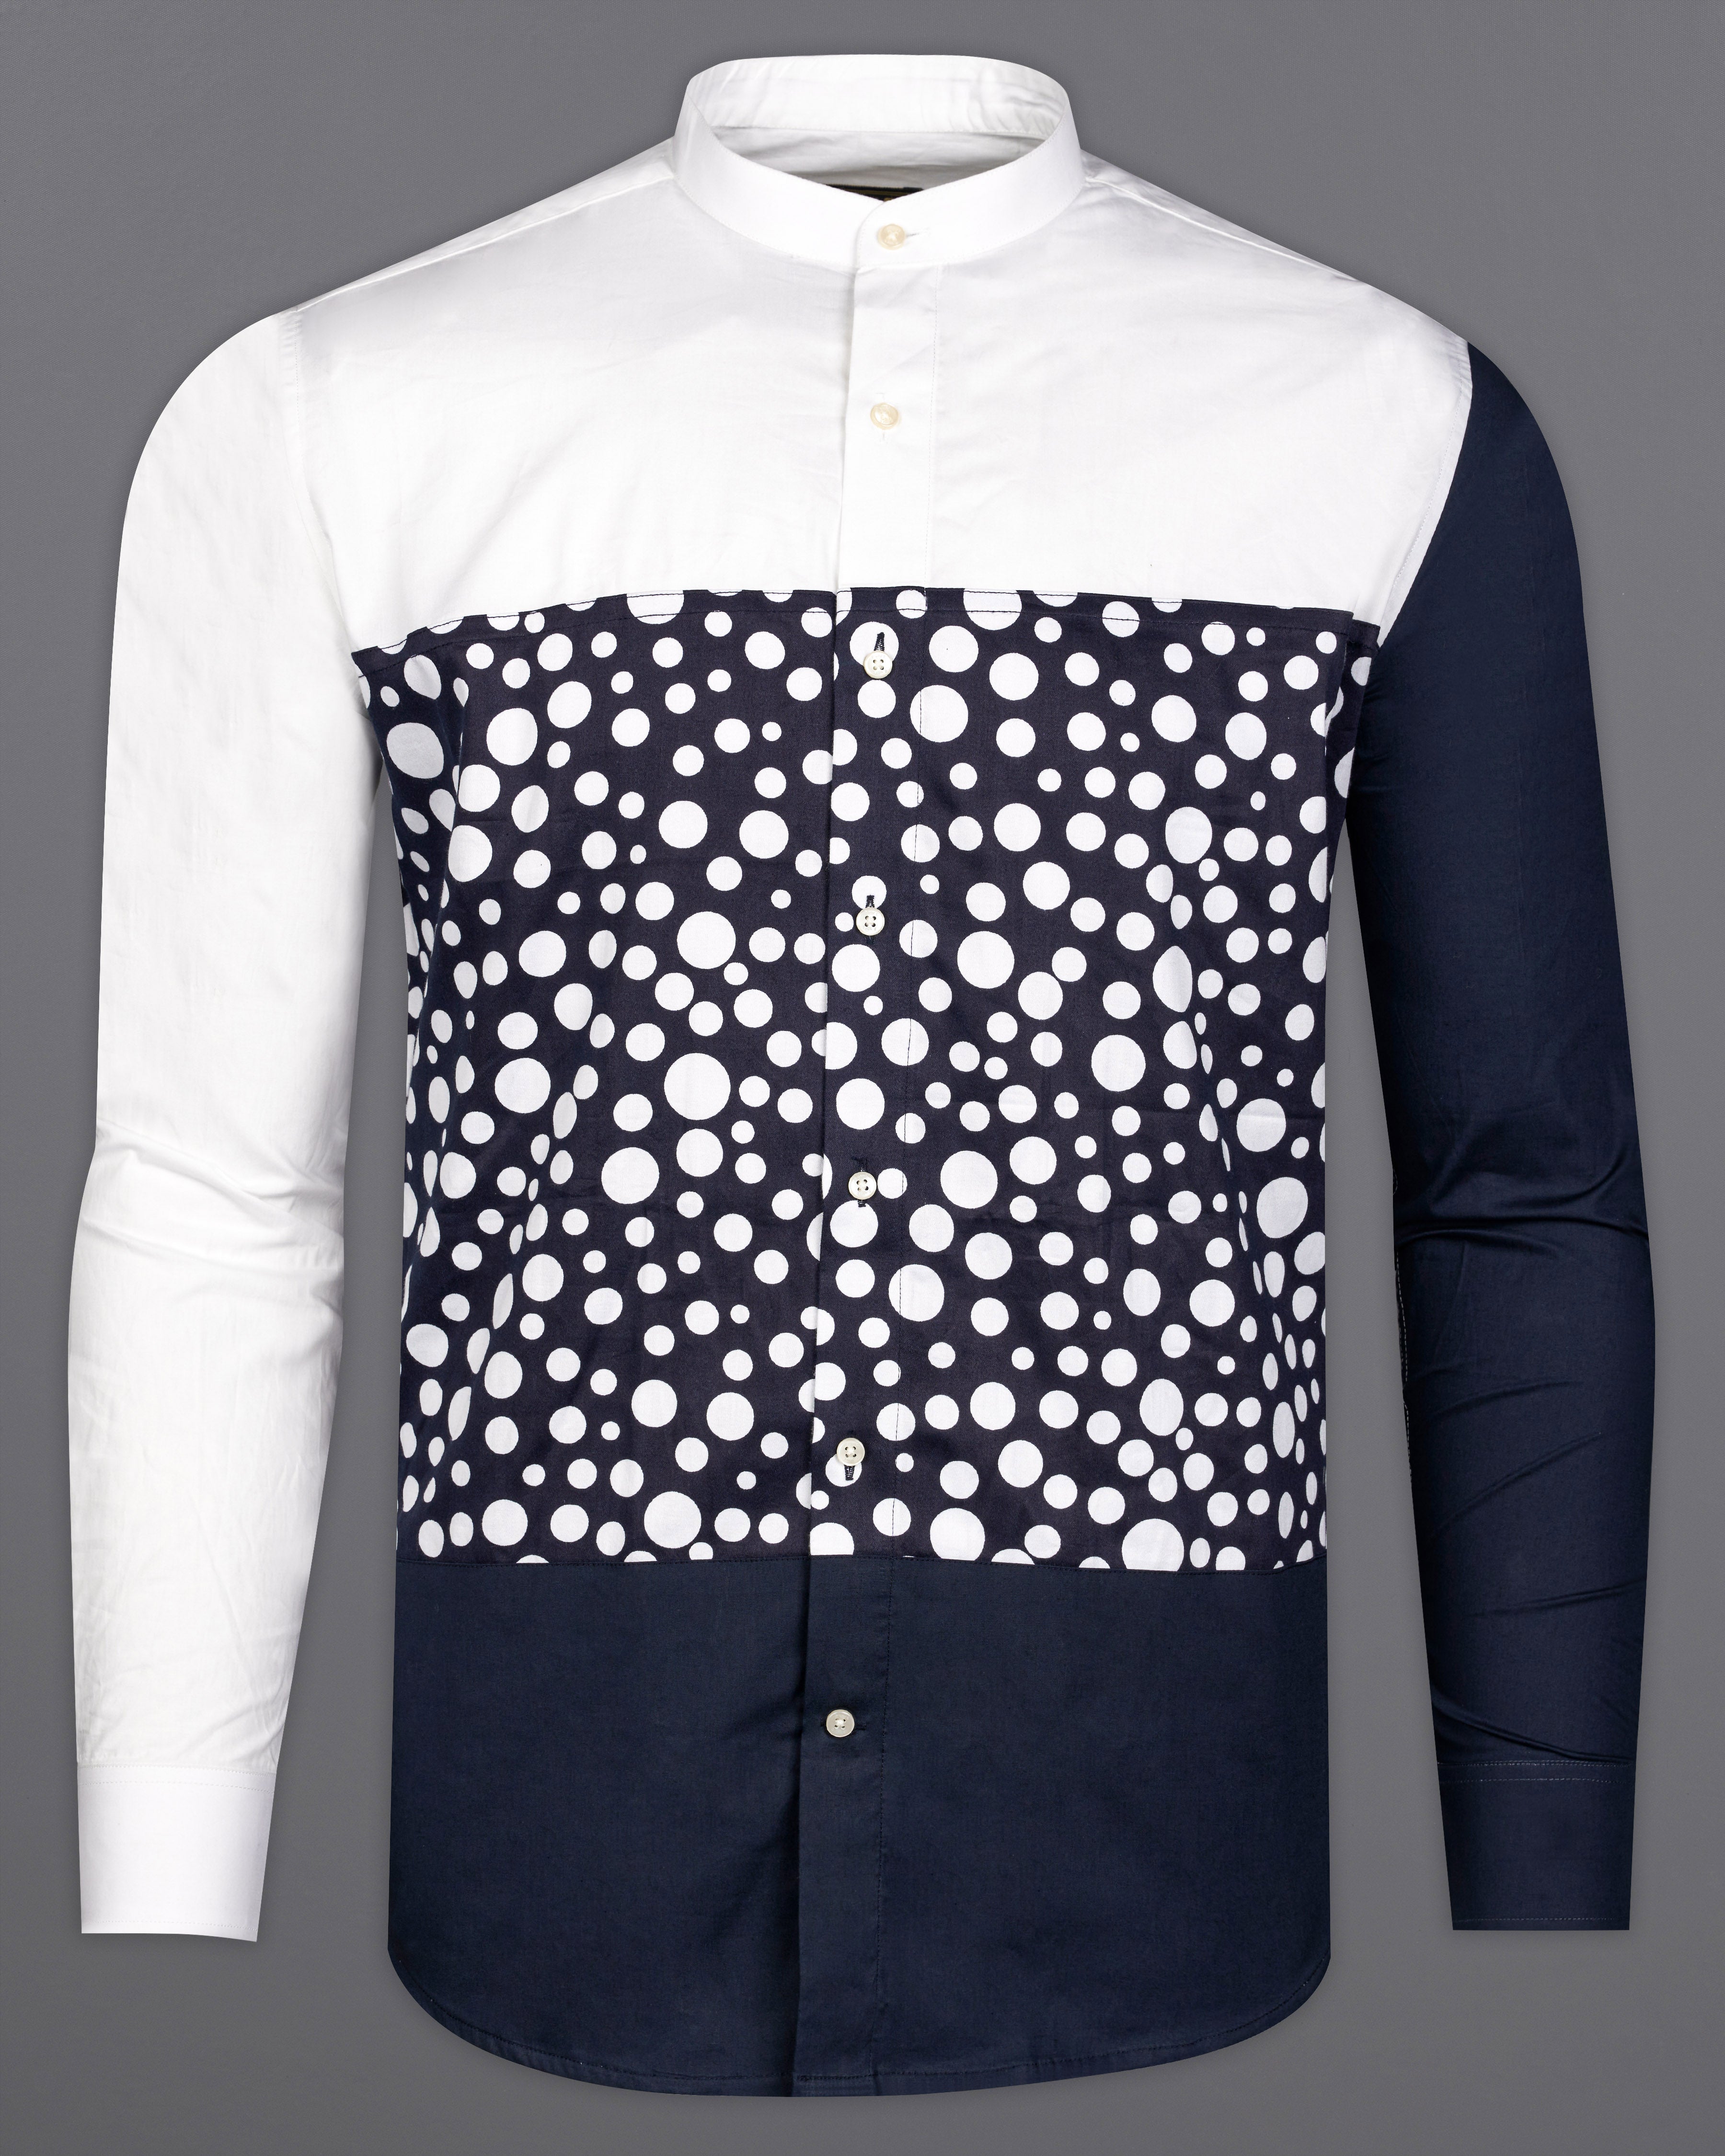 Bright White with Outer Space Blue Polka Premium Cotton Designer Shirt 9937-M-P229-38, 9937-M-P229-H-38, 9937-M-P229-39, 9937-M-P229-H-39, 9937-M-P229-40, 9937-M-P229-H-40, 9937-M-P229-42, 9937-M-P229-H-42, 9937-M-P229-44, 9937-M-P229-H-44, 9937-M-P229-46, 9937-M-P229-H-46, 9937-M-P229-48, 9937-M-P229-H-48, 9937-M-P229-50, 9937-M-P229-H-50, 9937-M-P229-52, 9937-M-P229-H-52